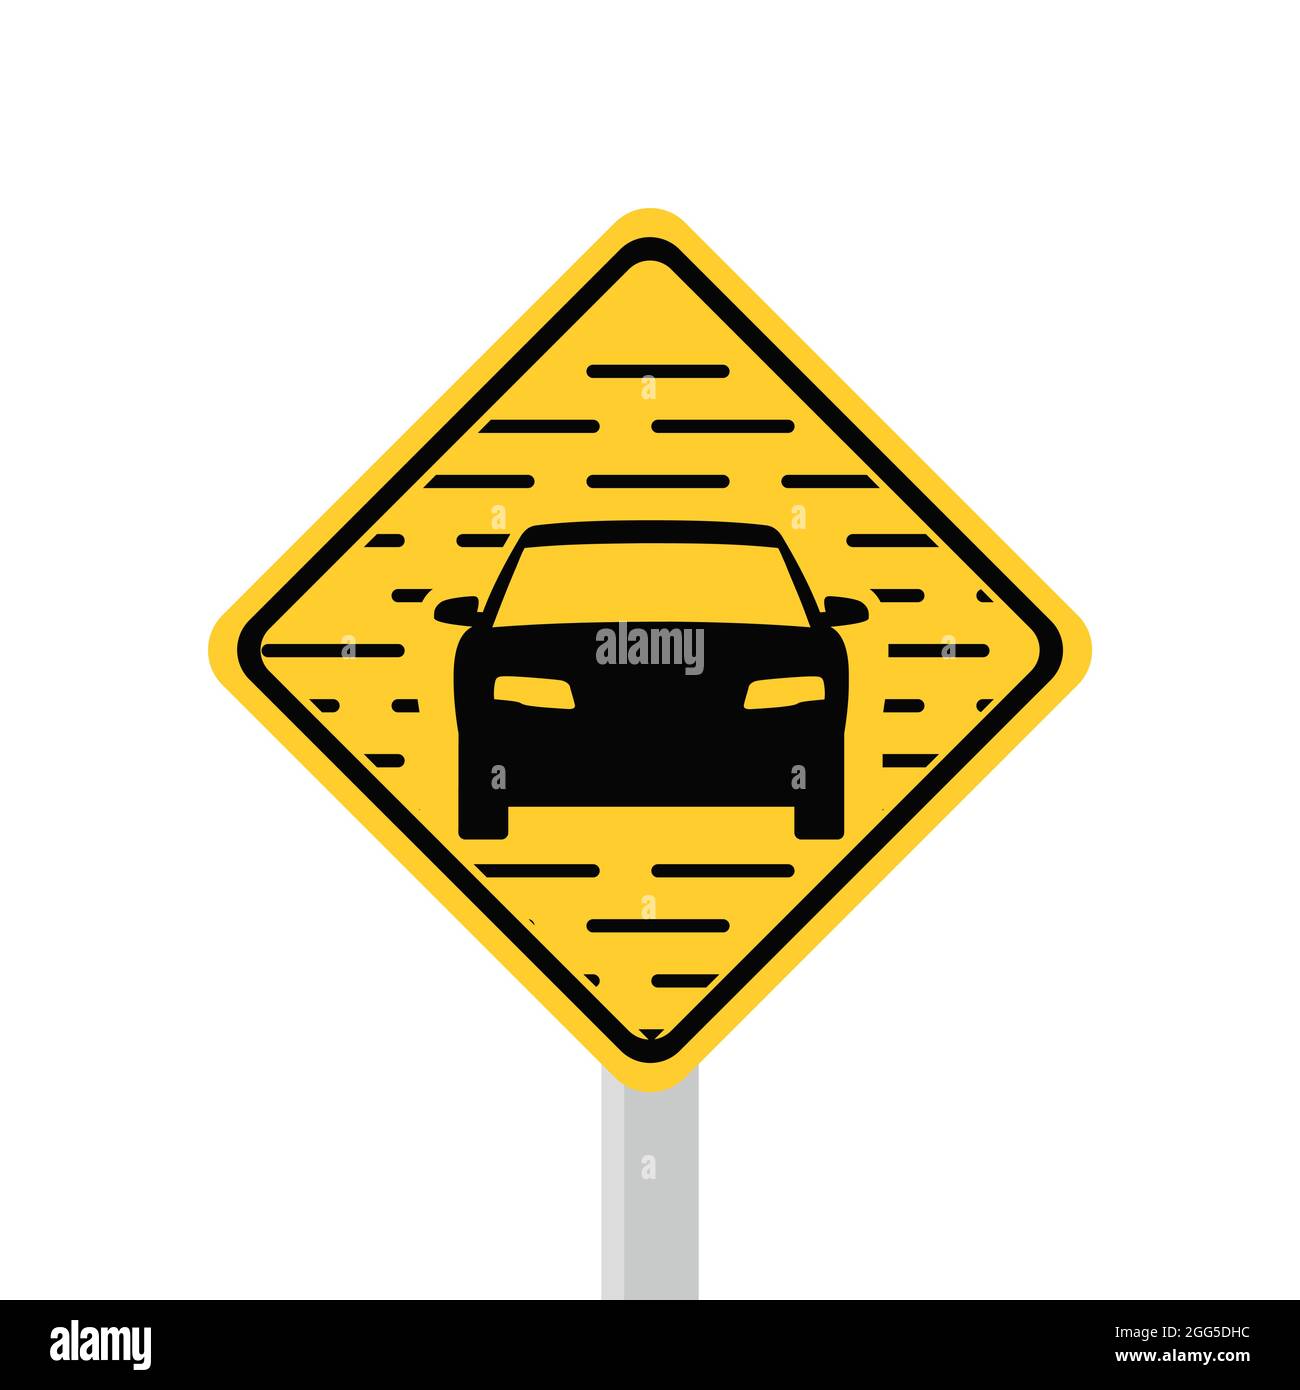 Weather traffic signs are foggy. Traffic safety signs are orange. foggy traffic signs Stock Vector